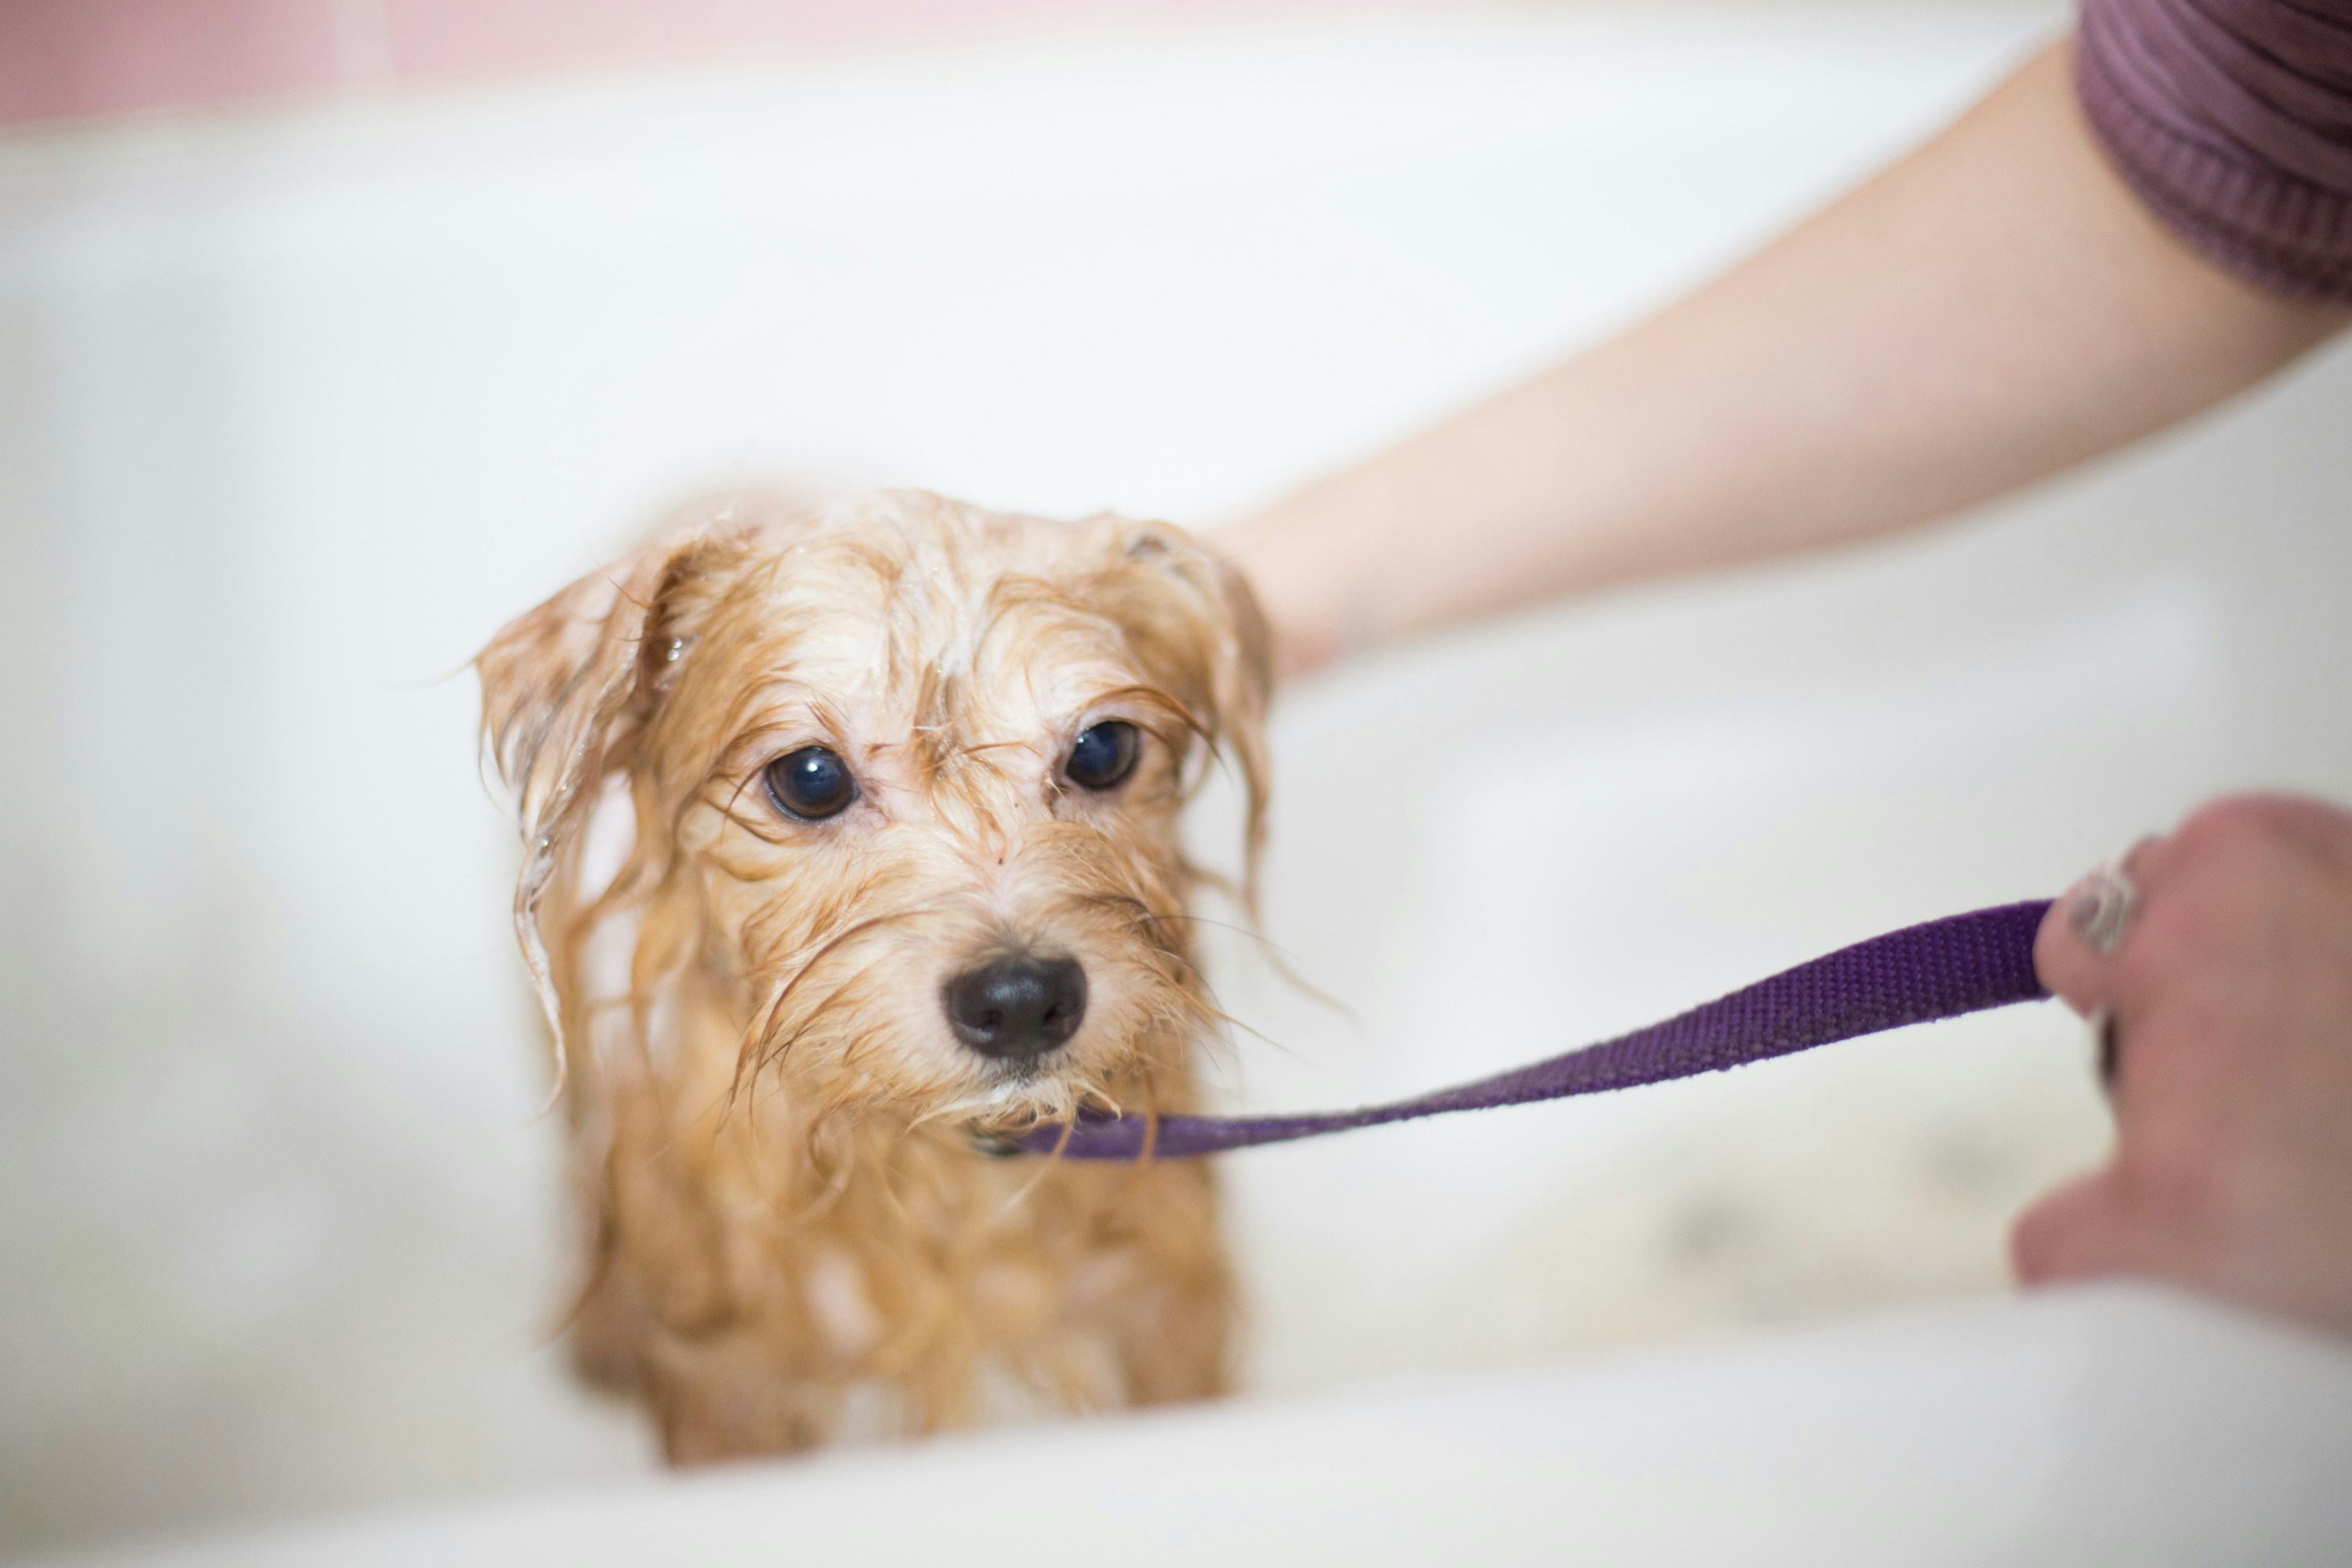 places to wash your dog